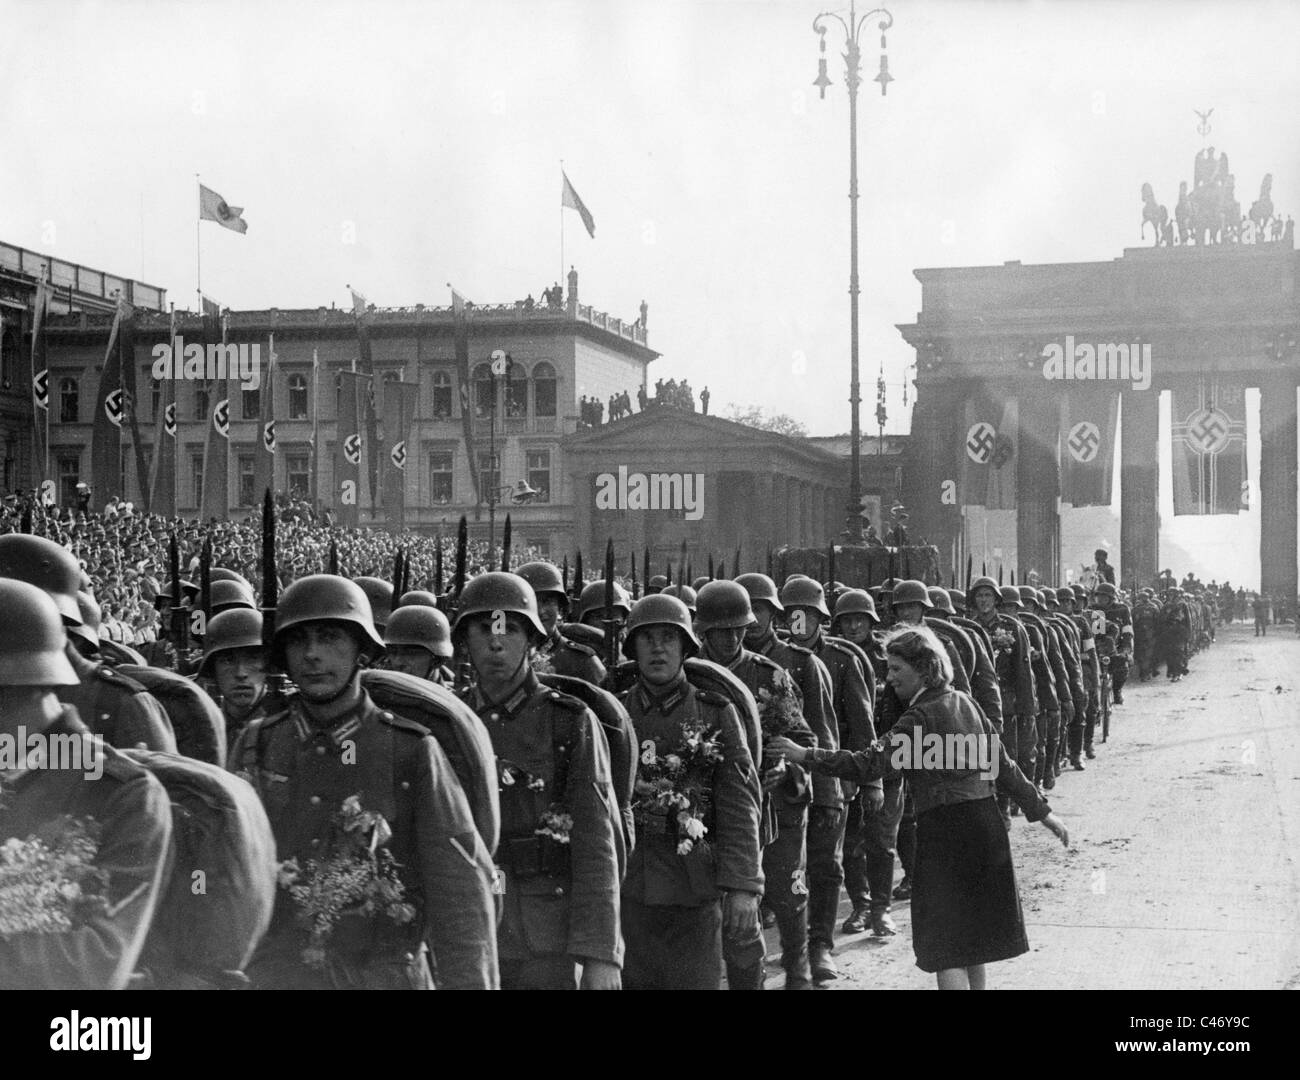 second-world-war-victory-parade-in-berlin-and-other-german-cities-C46Y9C.jpg